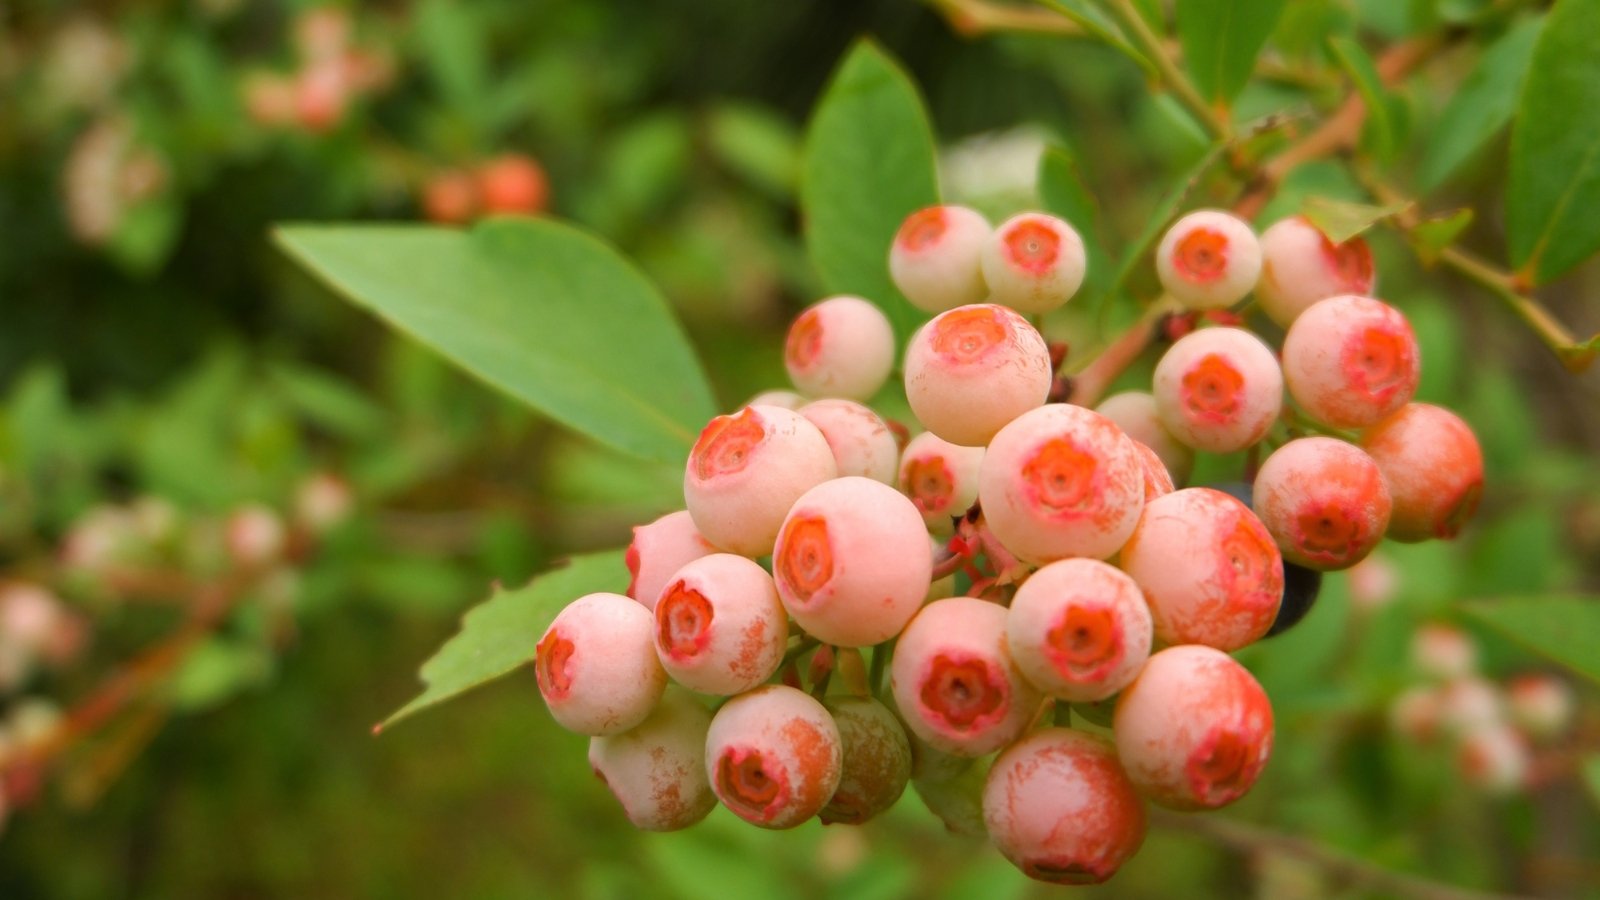 The pink blueberry bush features glossy, dark green leaves and clusters of vibrant pink berries.